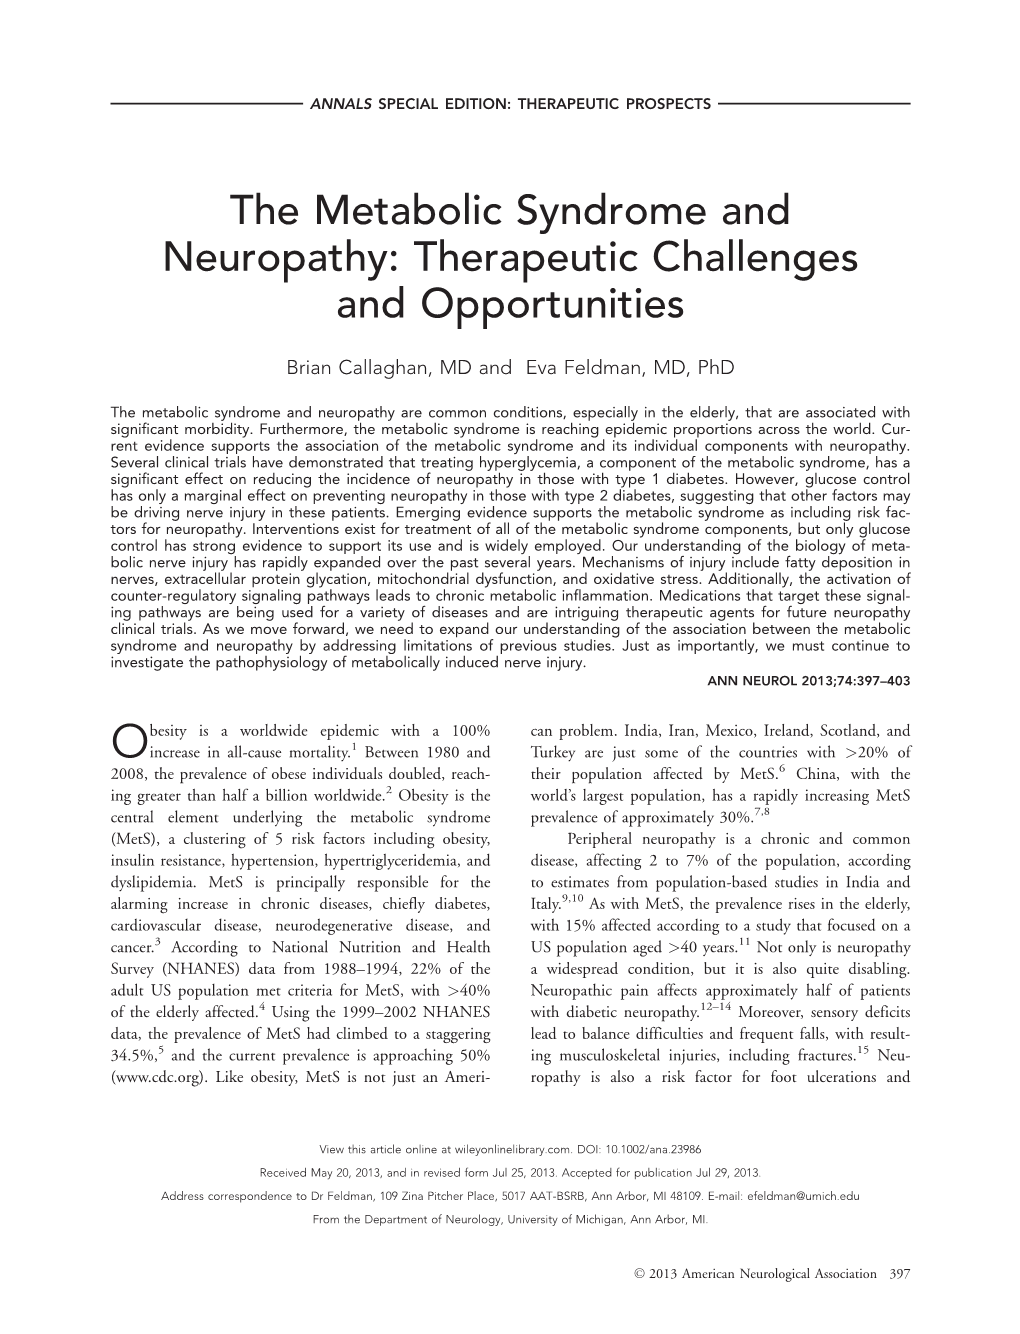 The Metabolic Syndrome and Neuropathy: Therapeutic Challenges and Opportunities